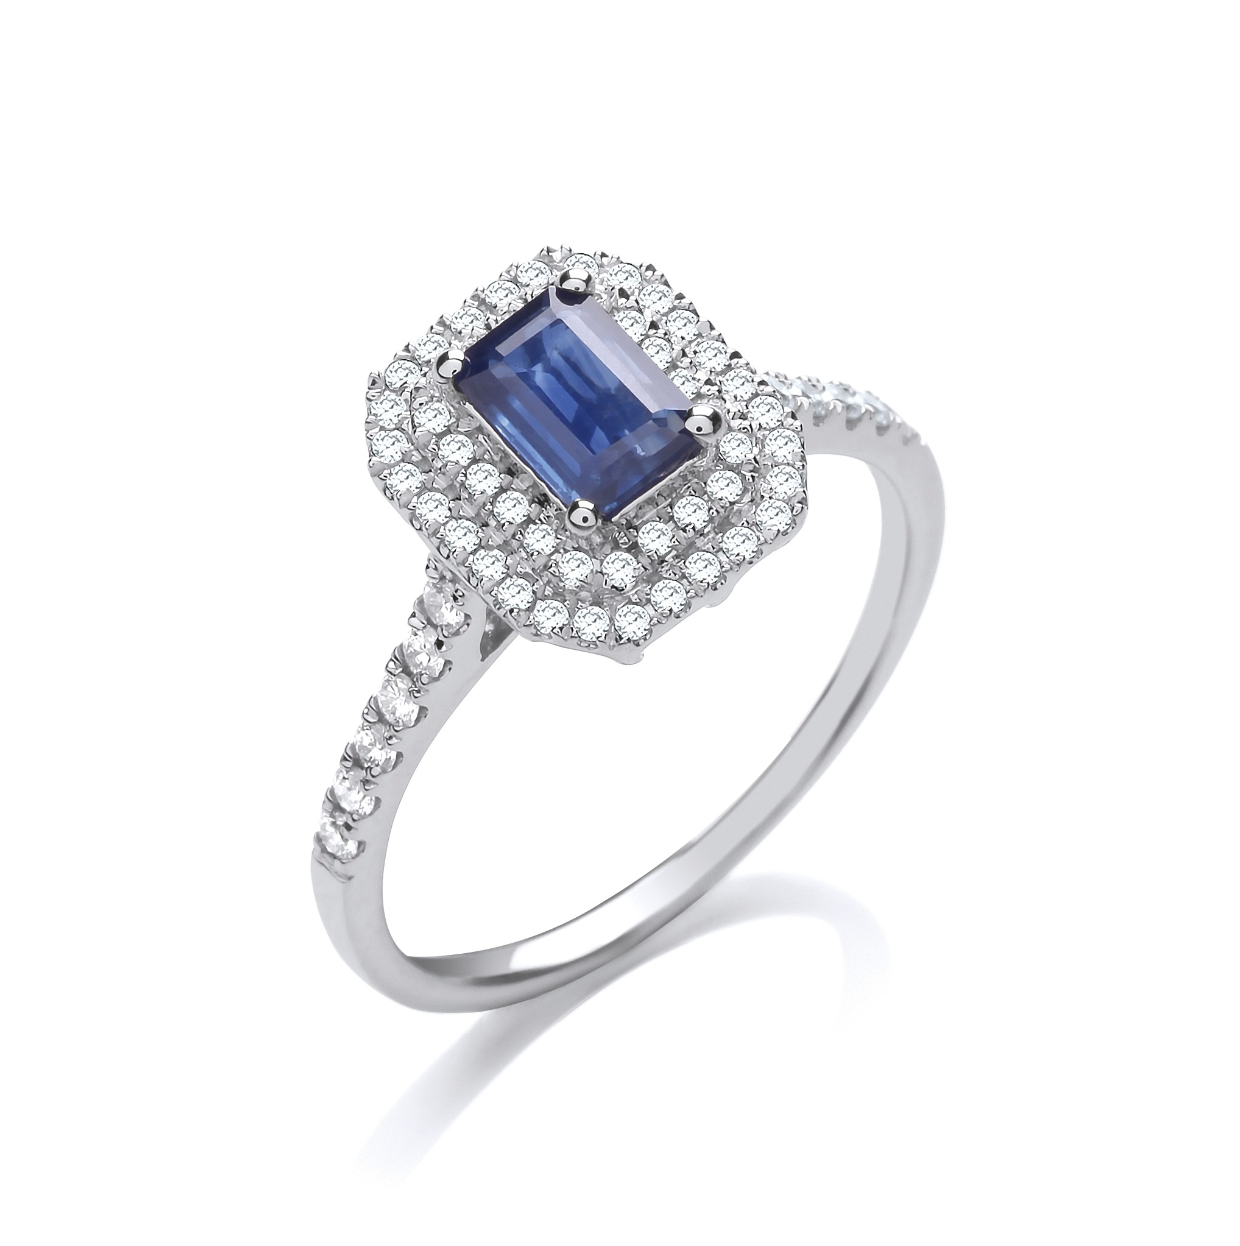 Double Halo Diamond and Sapphire Ring